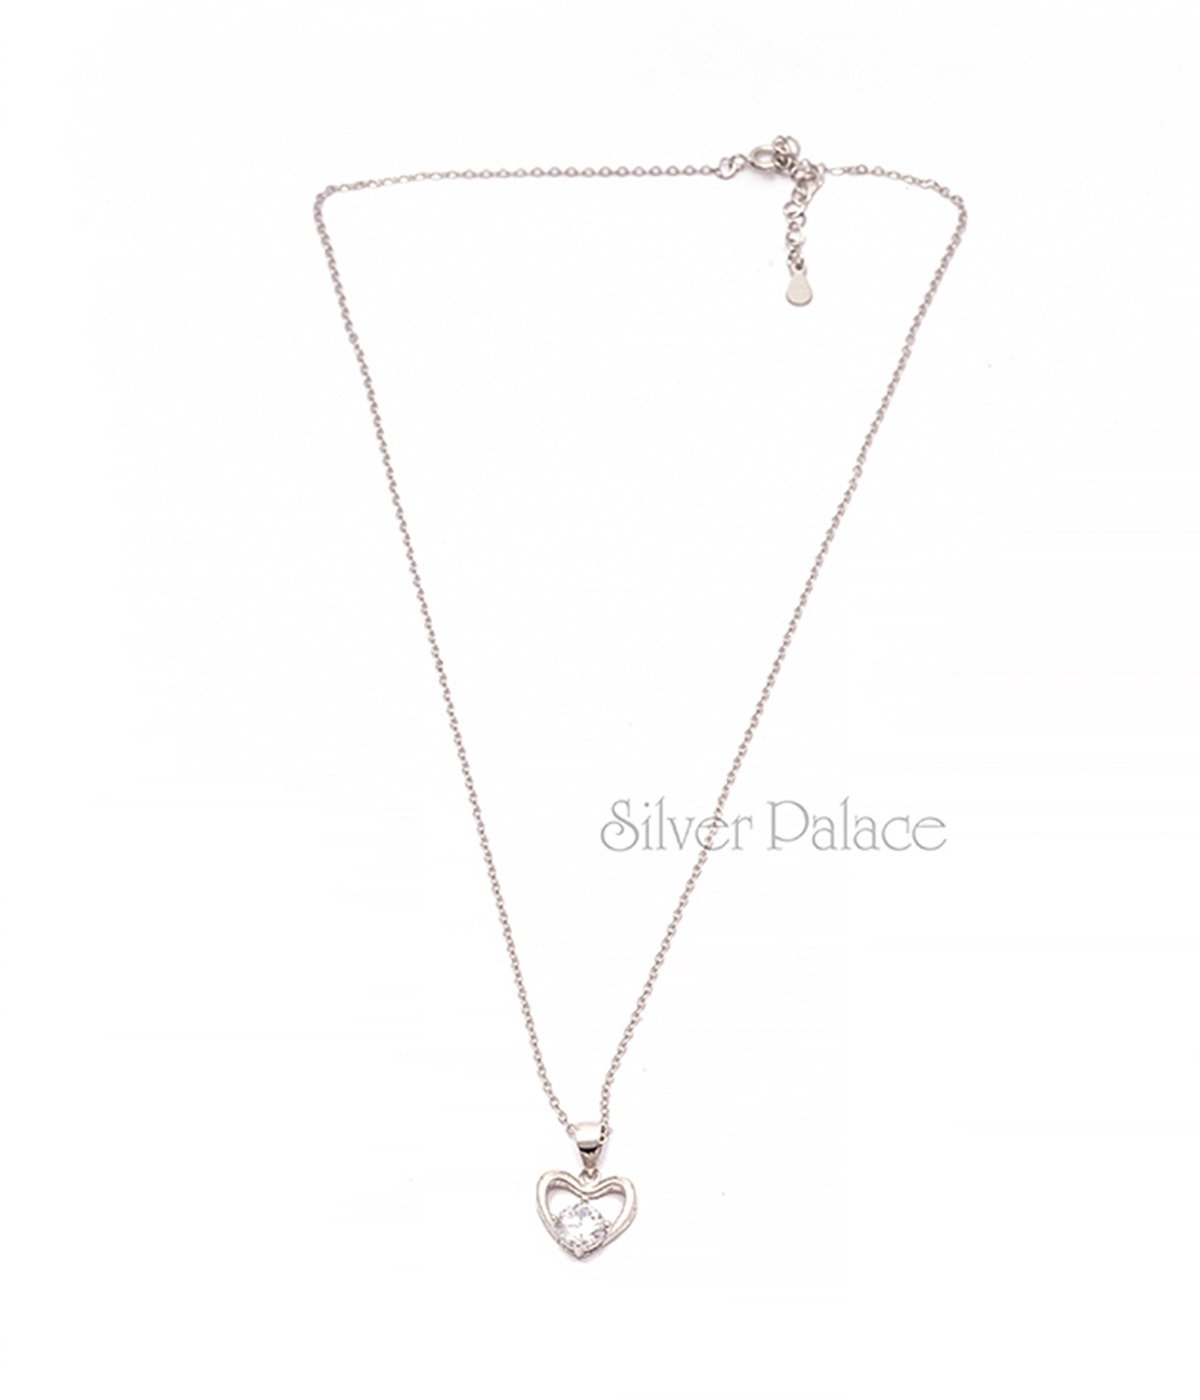 92.5 STERLING SILVER HOLLOW HEART STONE STUDDED PENDANT